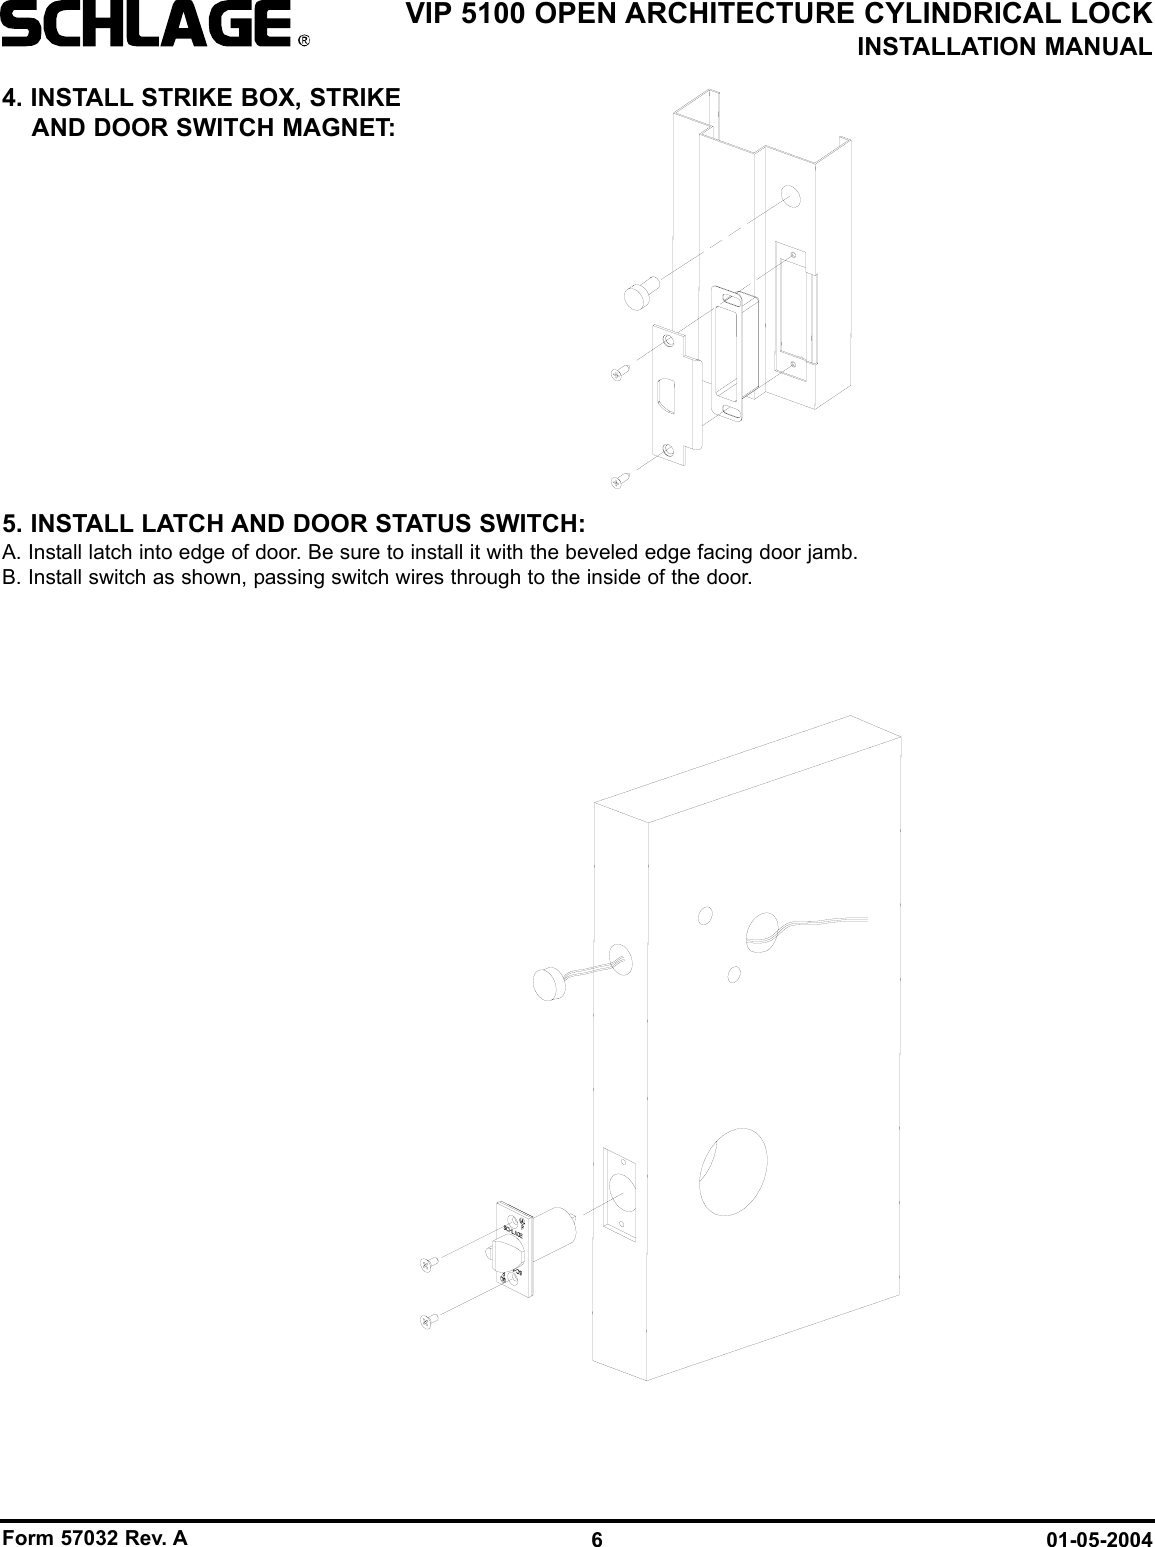 Form 57032 Rev. A 01-05-20046VIP 5100 OPEN ARCHITECTURE CYLINDRICAL LOCKINSTALLATION MANUAL4. INSTALL STRIKE BOX, STRIKEAND DOOR SWITCH MAGNET:5. INSTALL LATCH AND DOOR STATUS SWITCH:A. Install latch into edge of door. Be sure to install it with the beveled edge facing door jamb.B. Install switch as shown, passing switch wires through to the inside of the door.